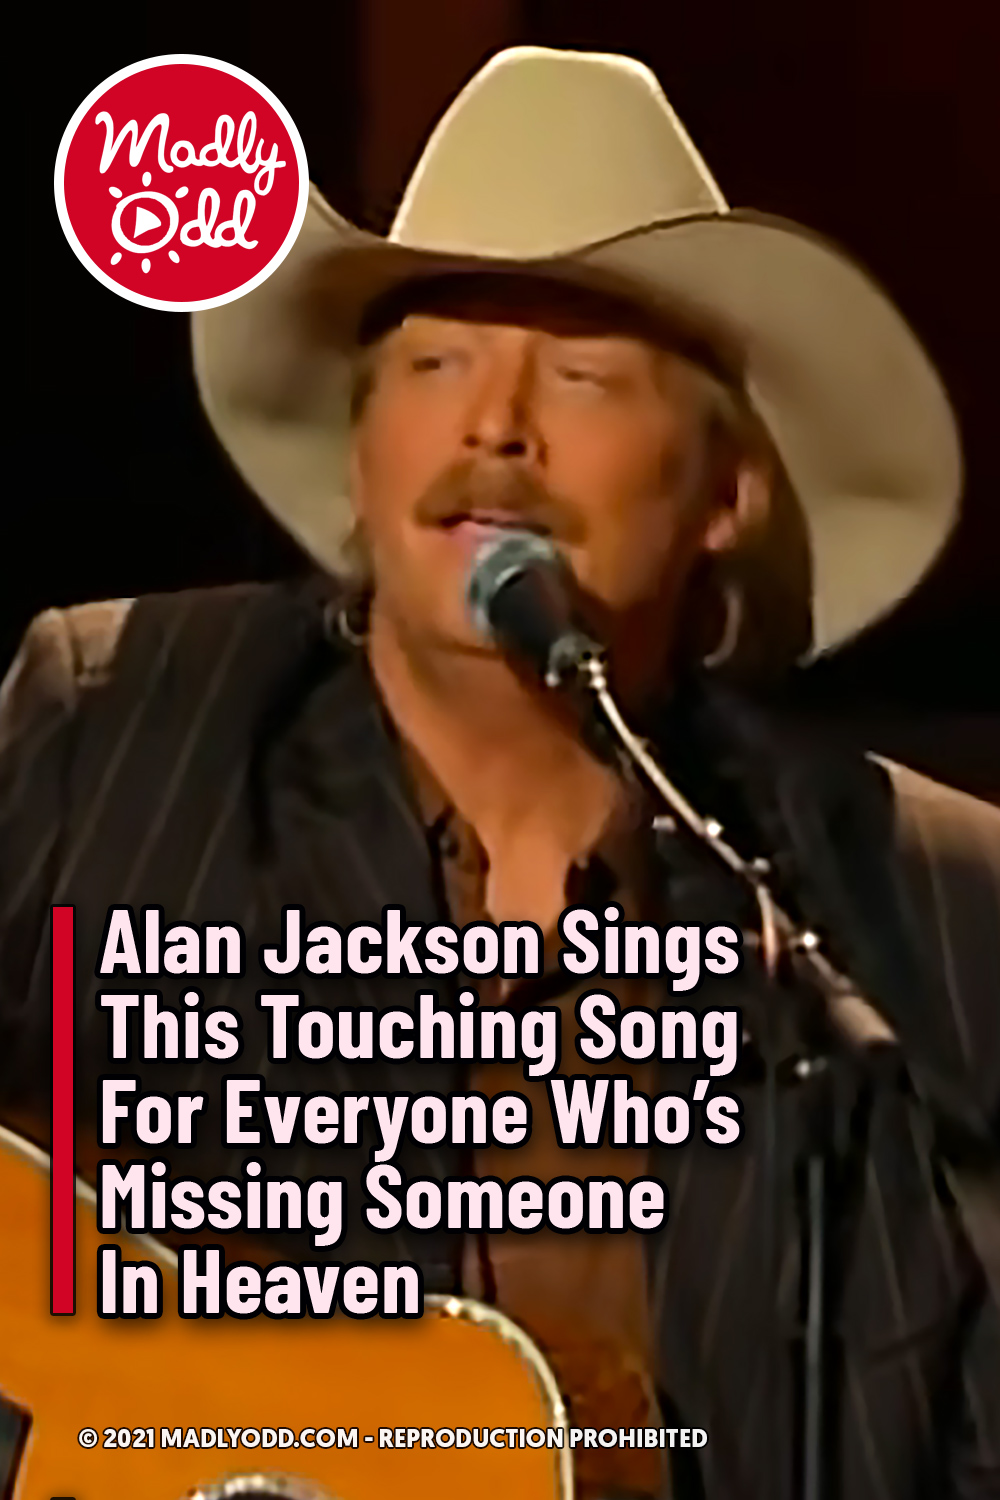 Alan Jackson Sings This Touching Song For Everyone Who’s Missing Someone In Heaven